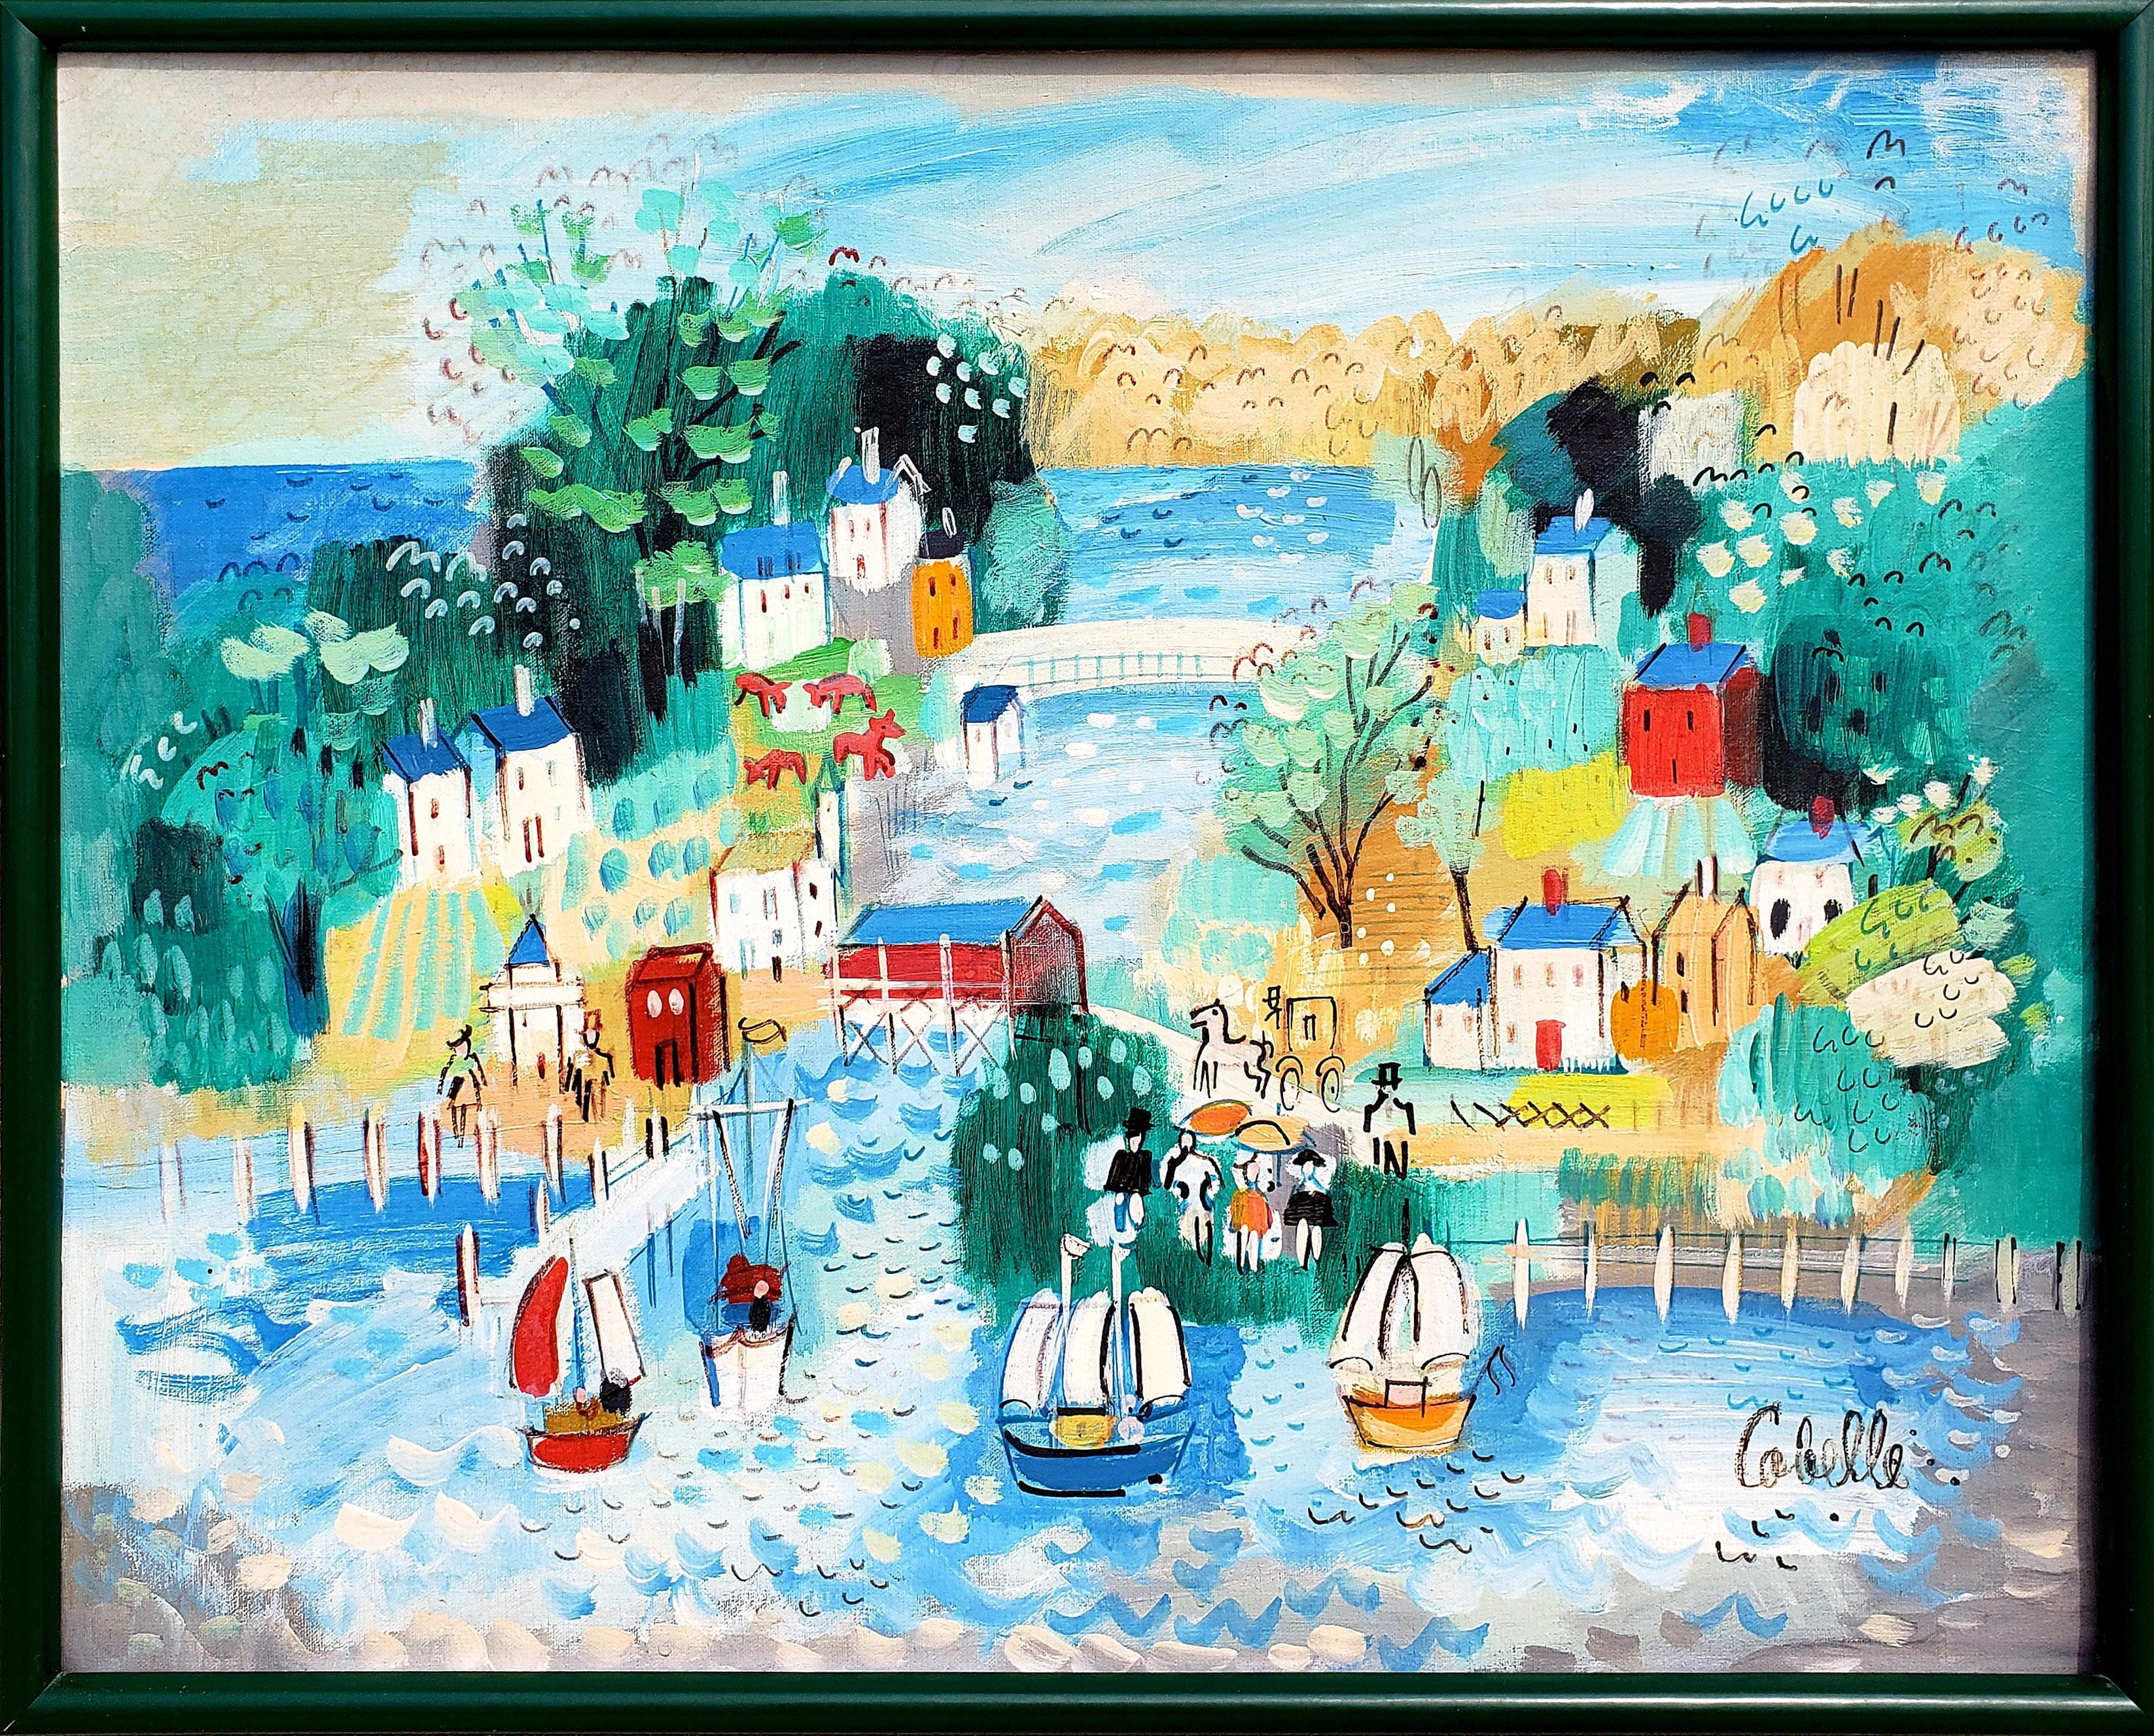 A small farm village by the water as interpreted by the artist. Boats are sailing the harbor and there is a horse and buggy going over the covered bridge. This painting is signed in the lower right by the artist.

Size: 30 x 40 in. (76.2 x 101.6